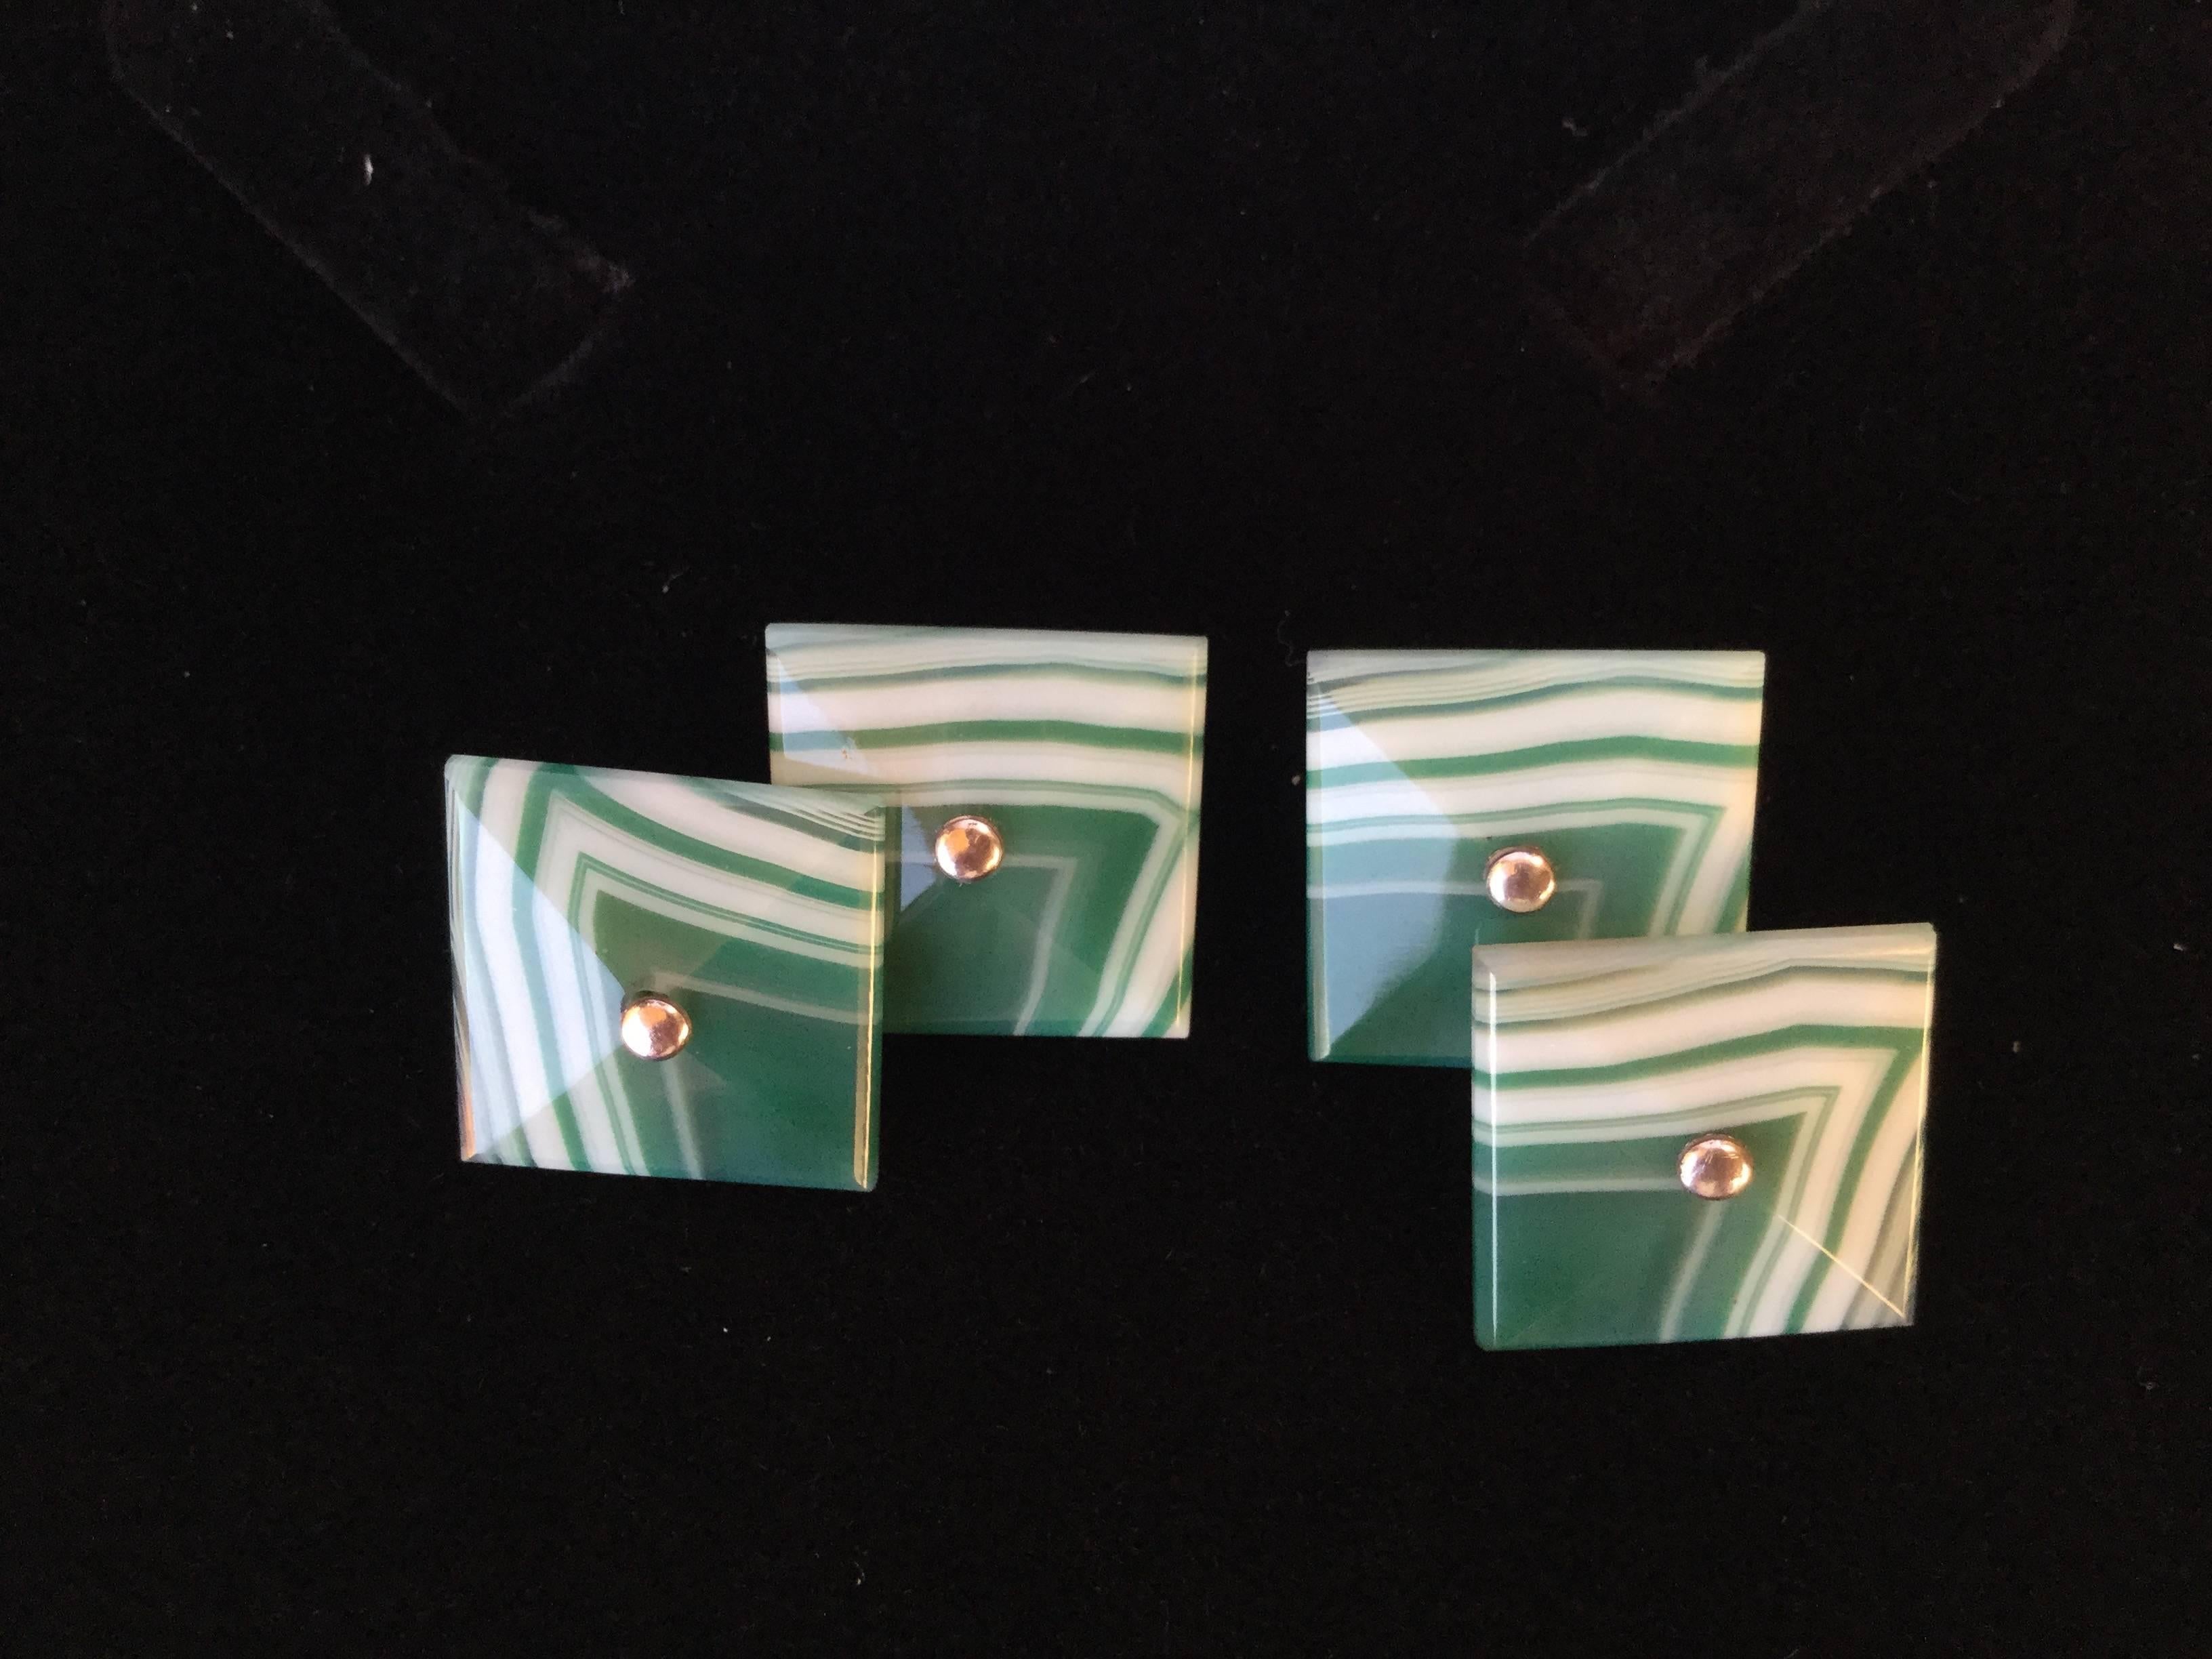 Exquisite pair of green banded agate and sterling silver Art Deco cufflinks. Highly polished to a satiny smooth finish. Lovely natural stripes in the stones. Cut to be slightly domed. Excellent Condition. French. 1930's. Unsigned but test as